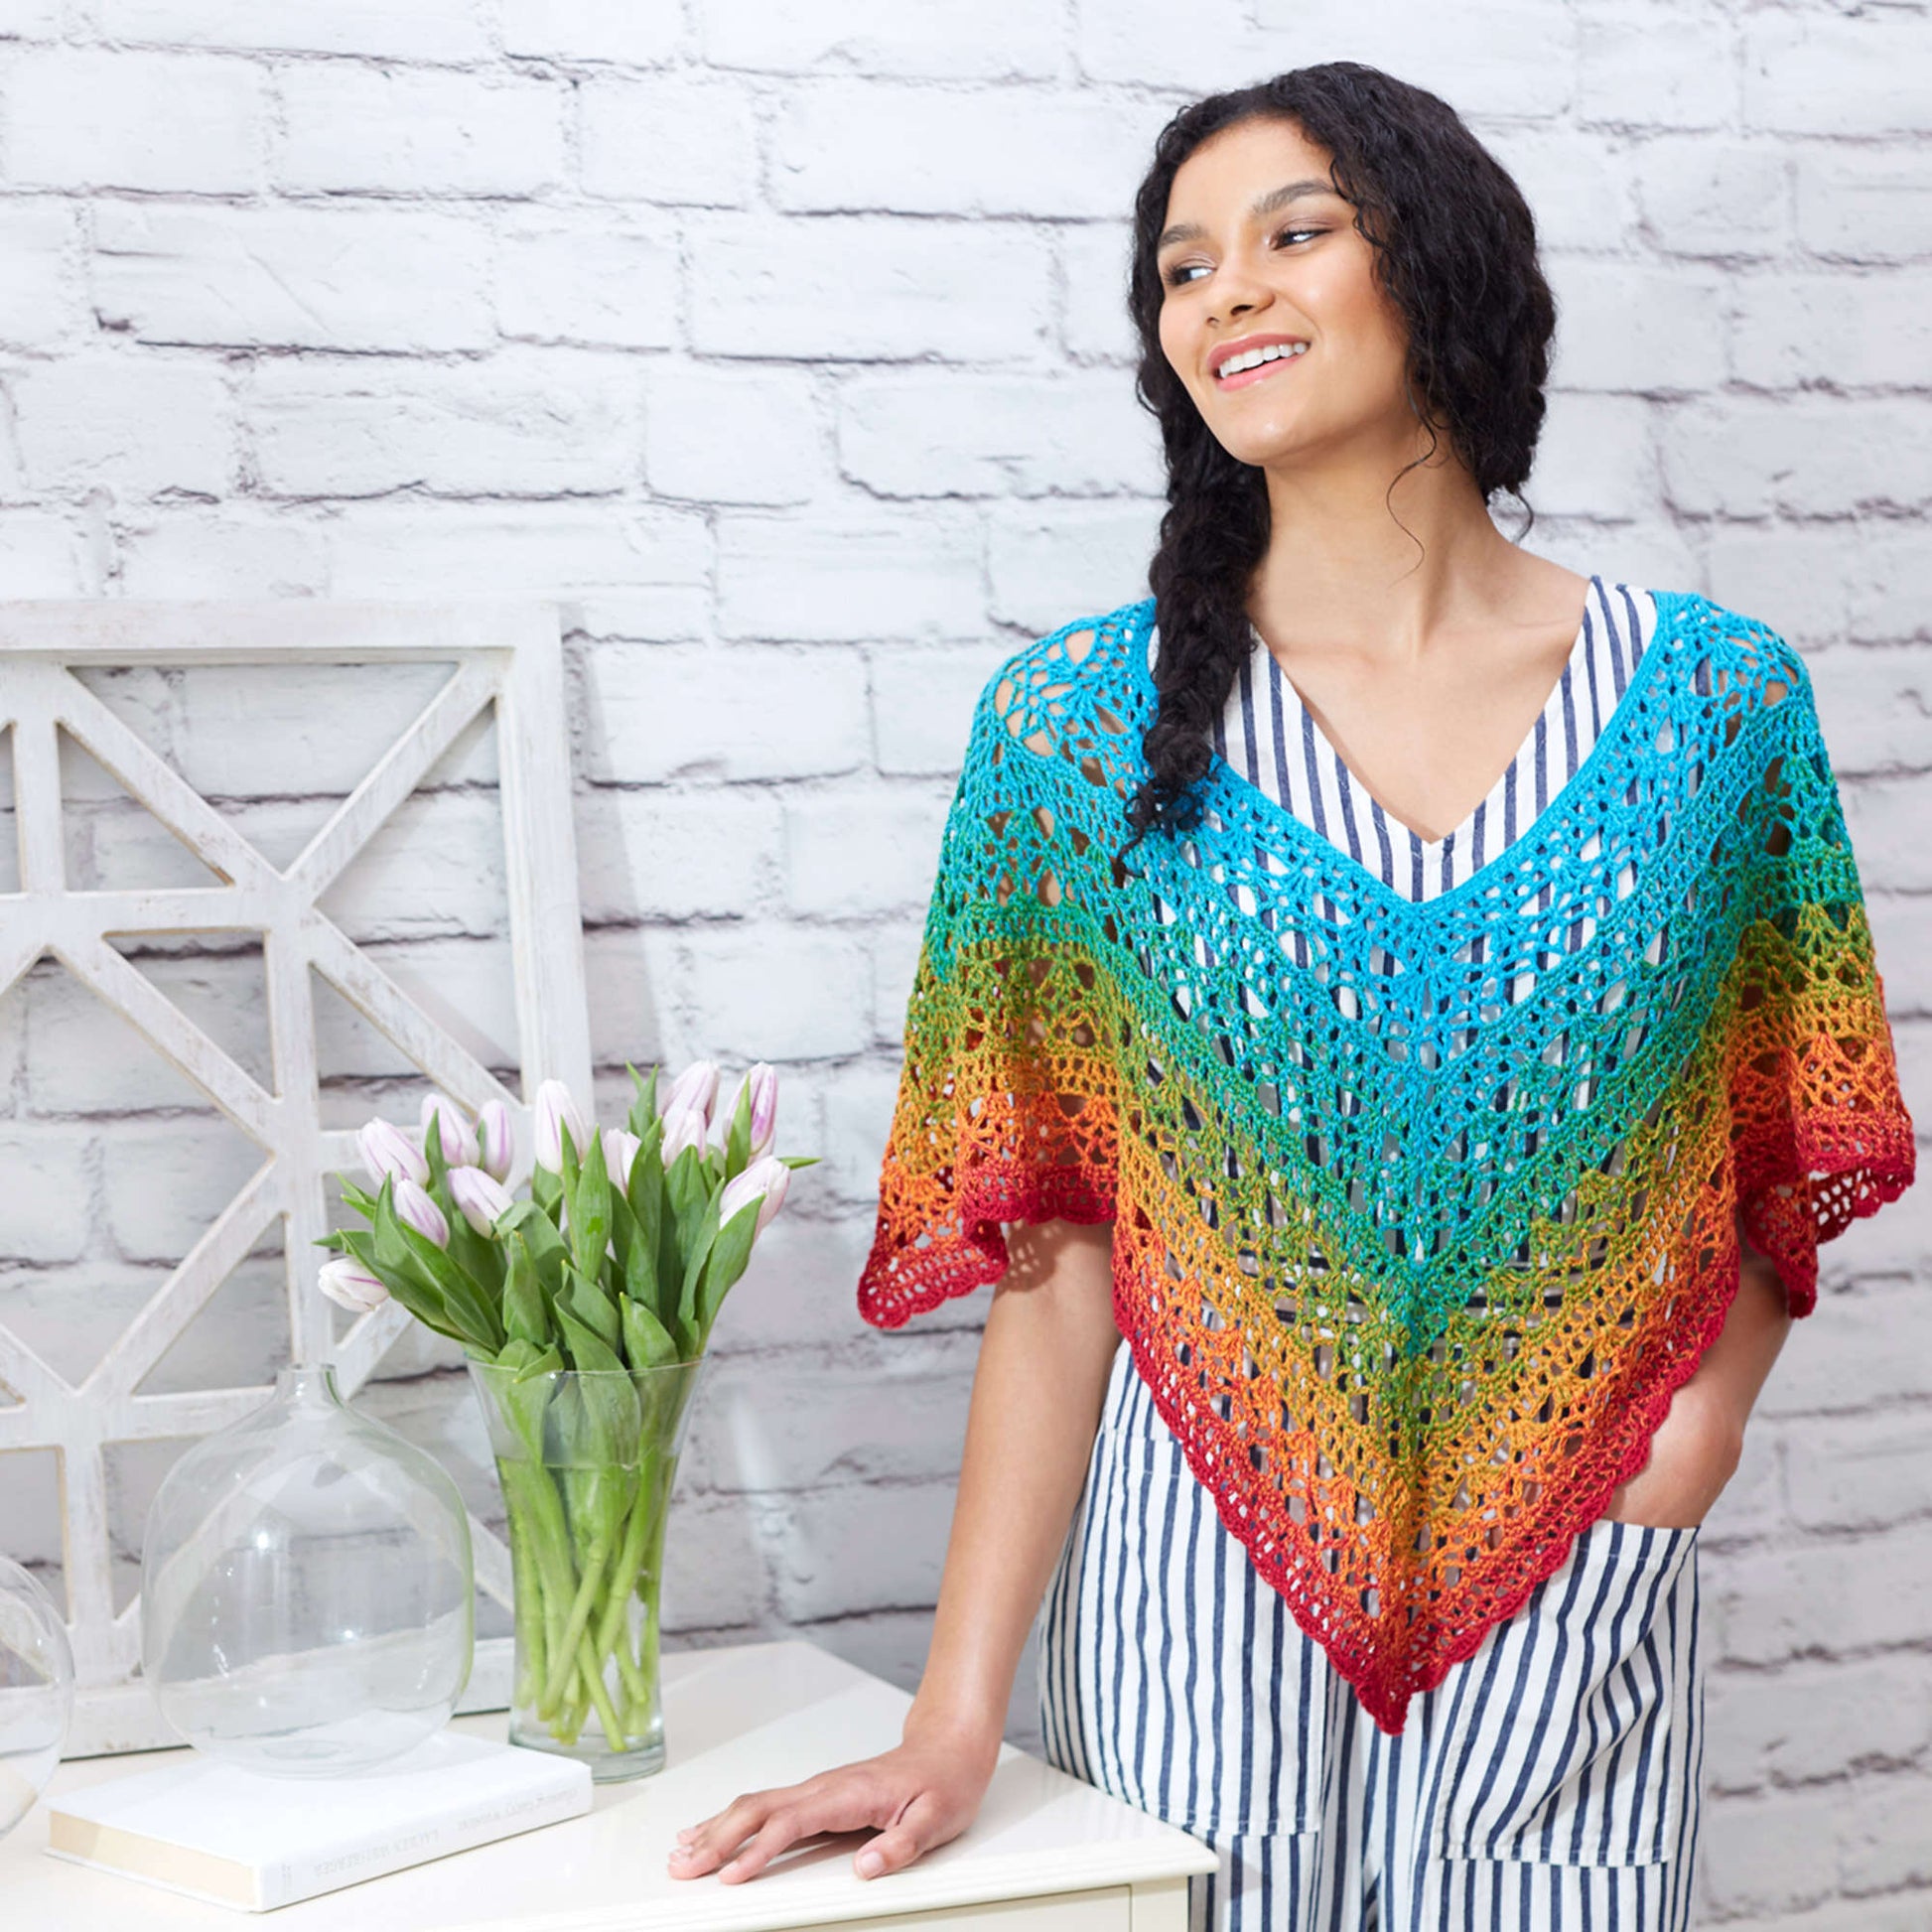 Free Red Heart Fire And Ice Poncho Pattern